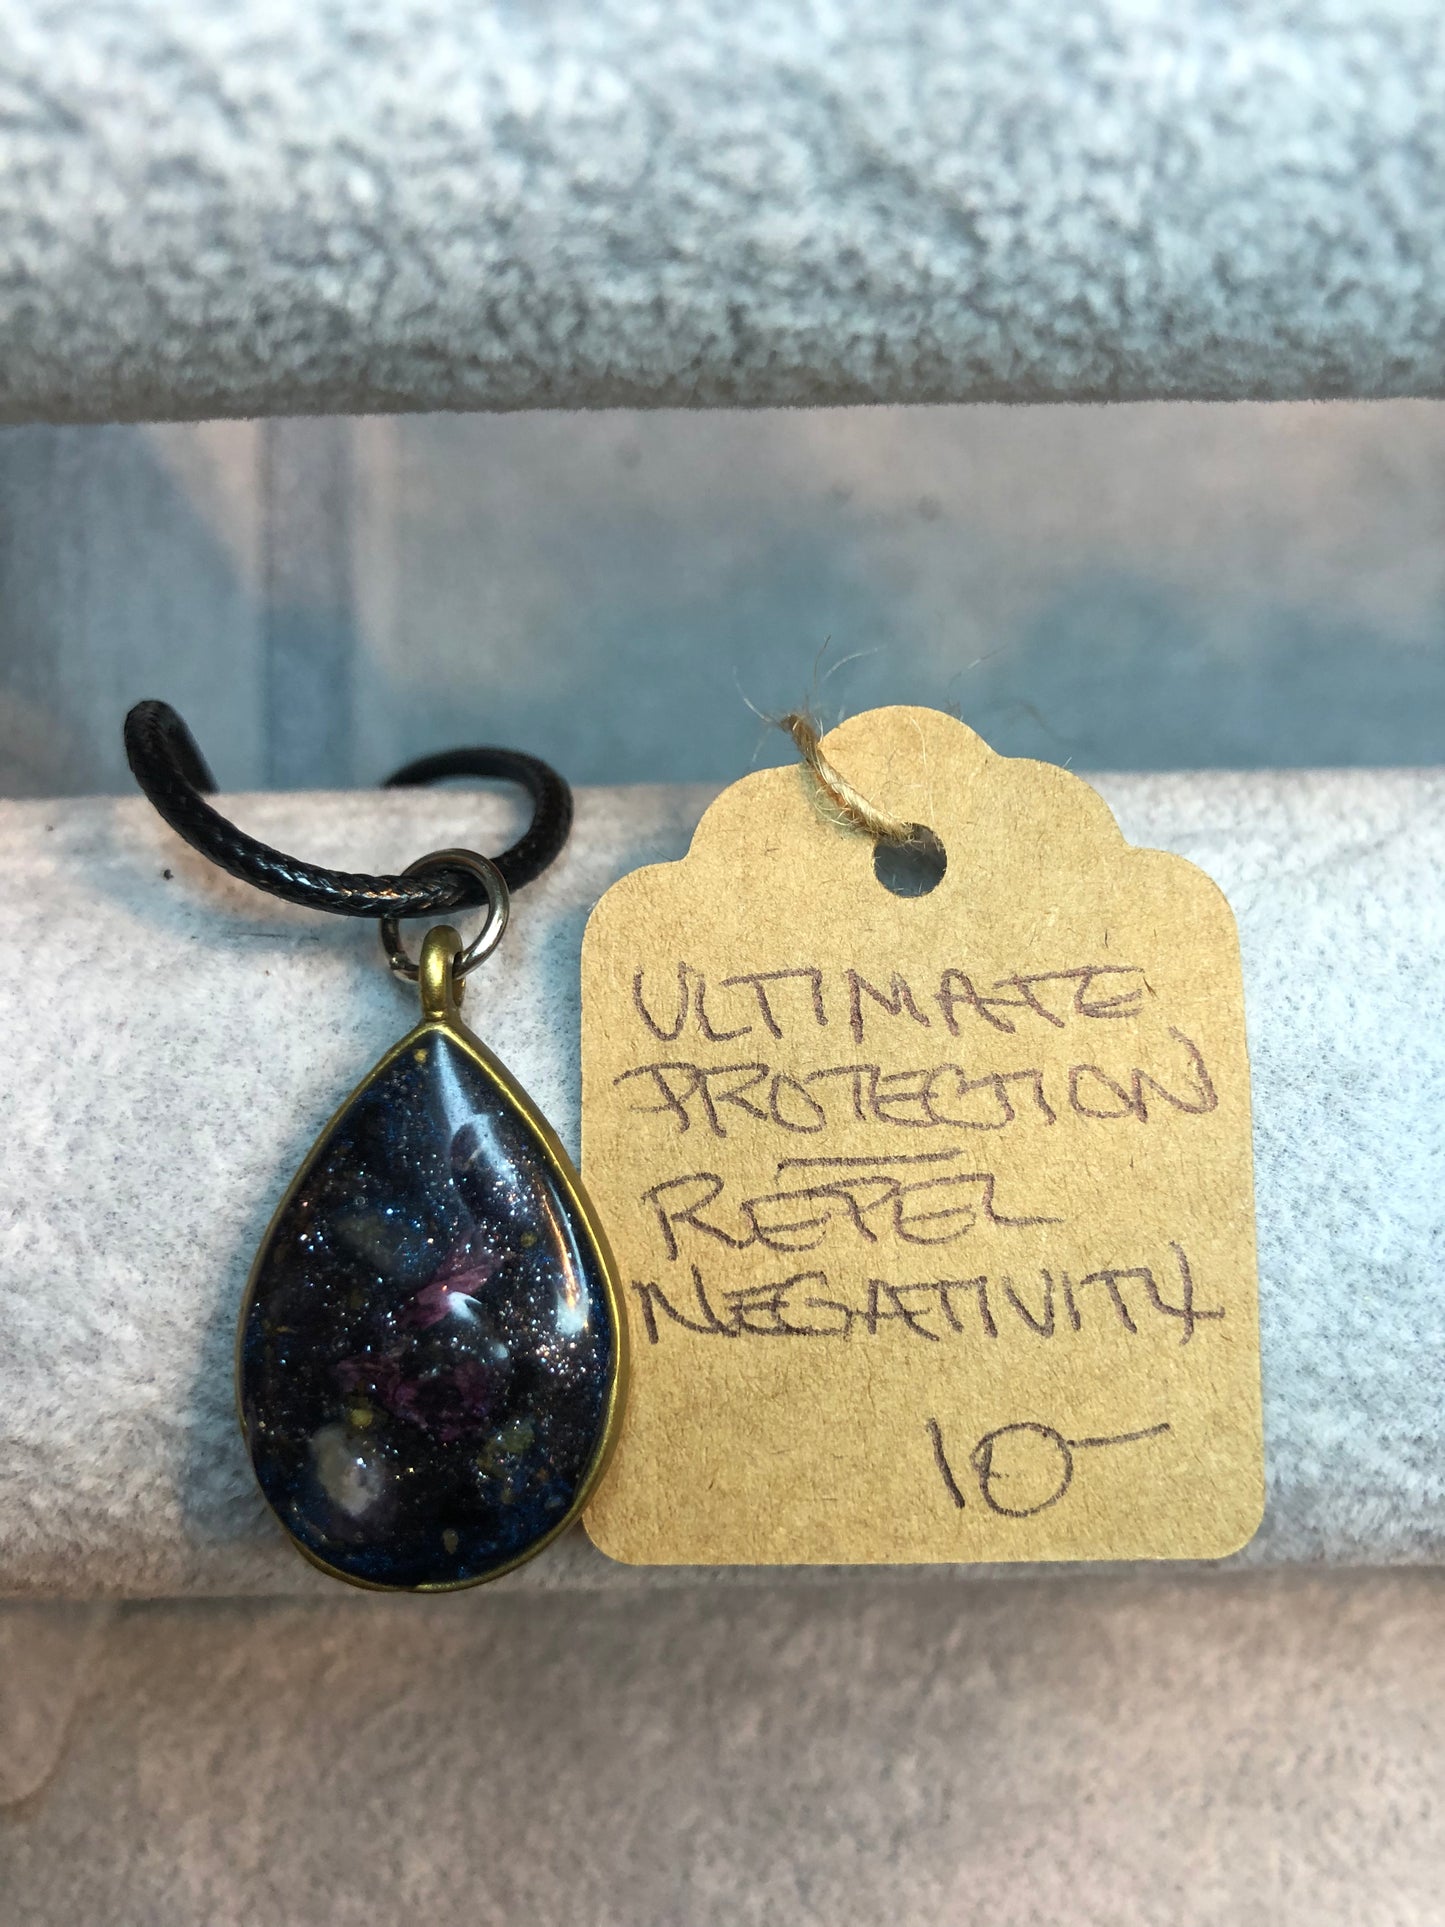 Amethyst and Black Obsidian Necklace Jewelry - Imperfect Doming